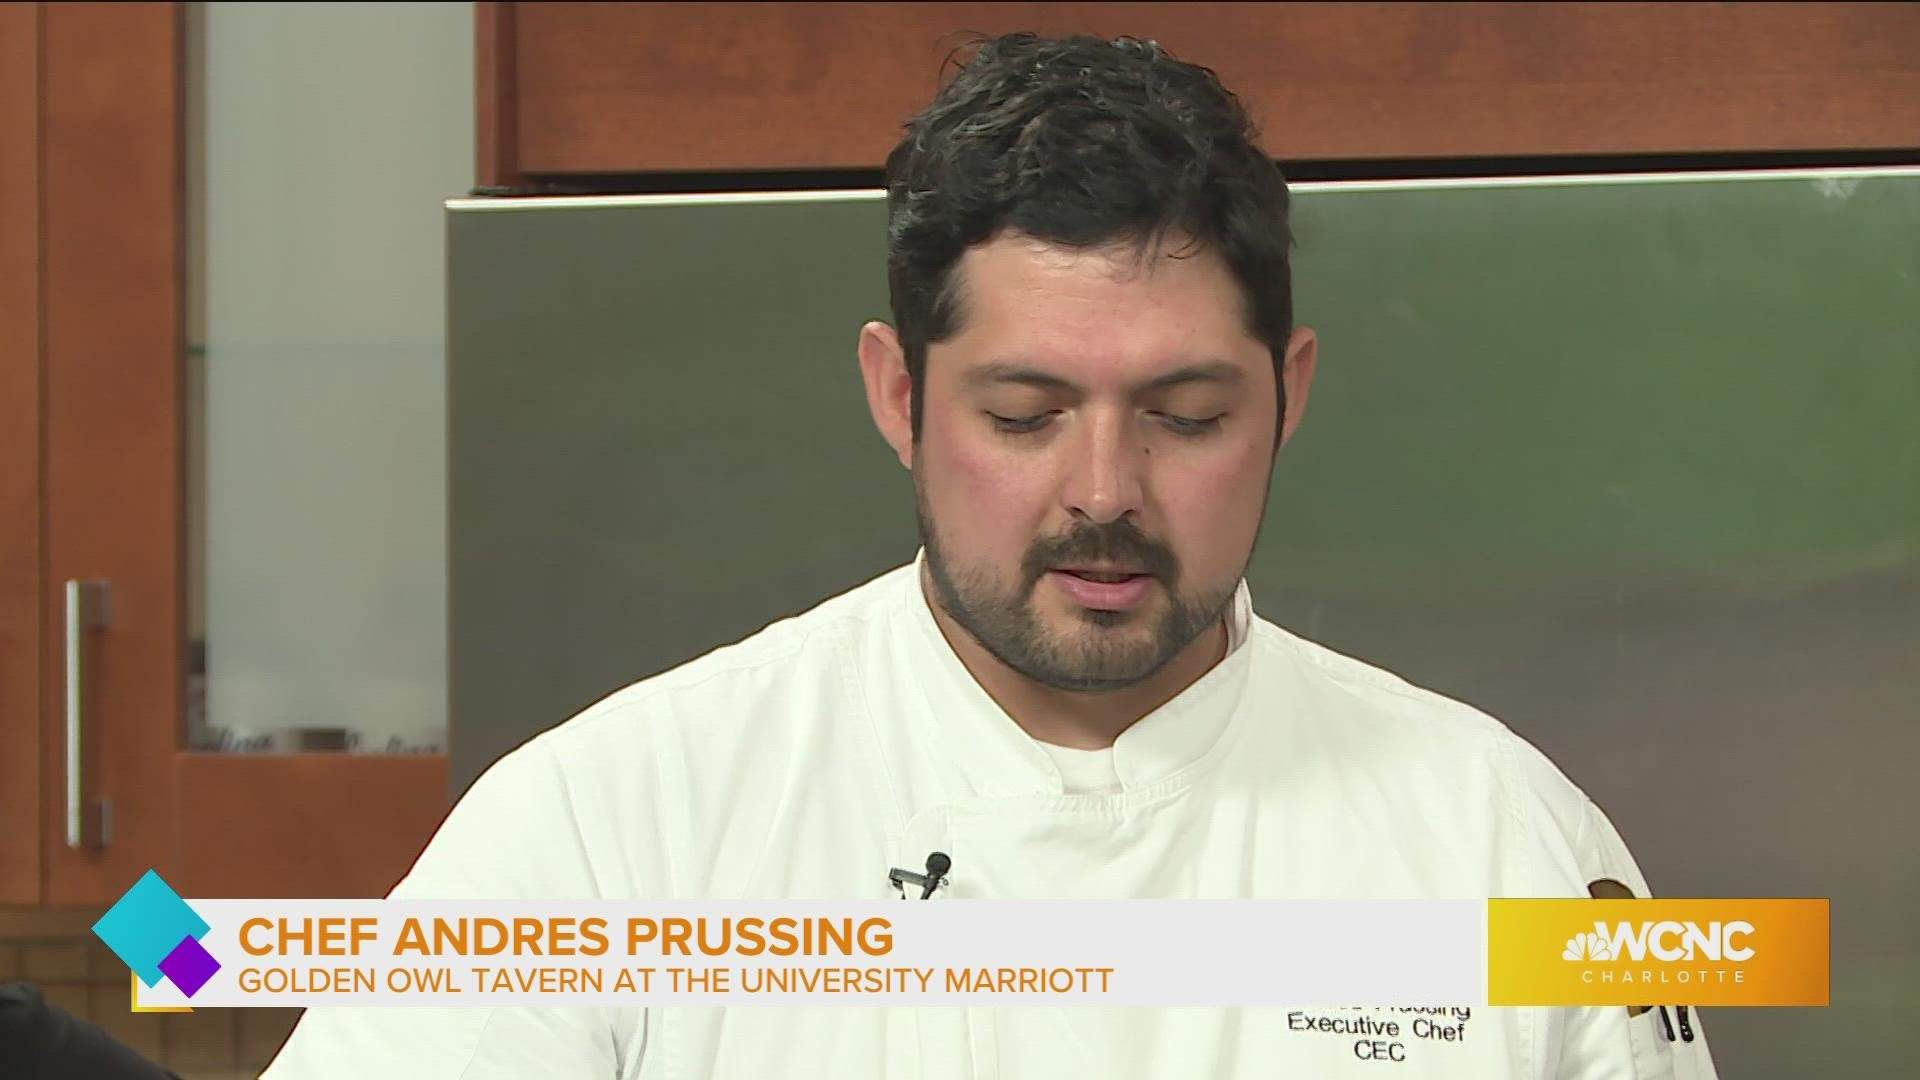 Chef Andres Prussing, from the Golden Owl Tavern at the University Marriott in Charlotte gave a sneak peak at his culinary creation